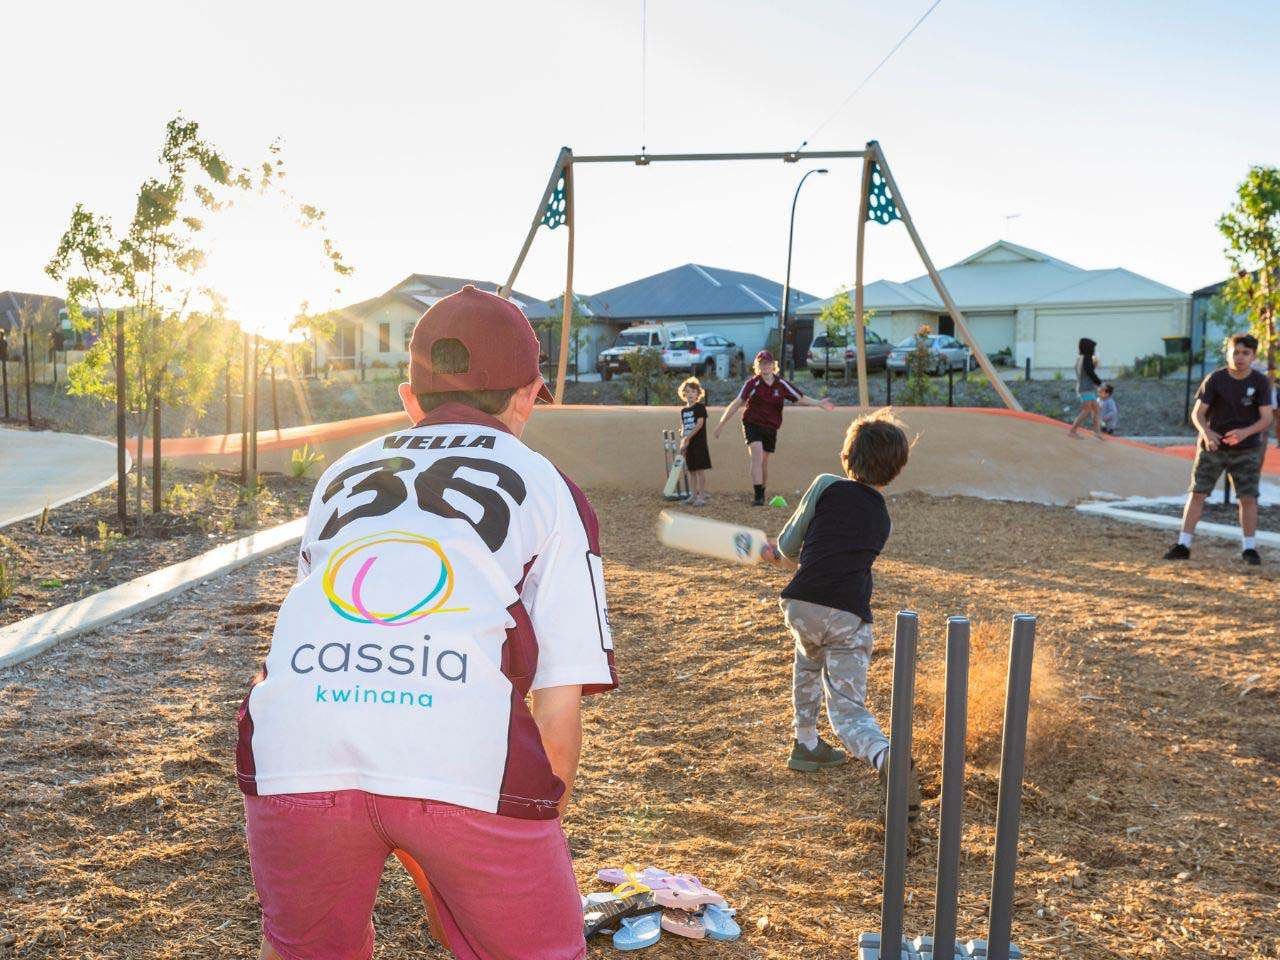 Cassia, Kwinana young children playing cricket in the park